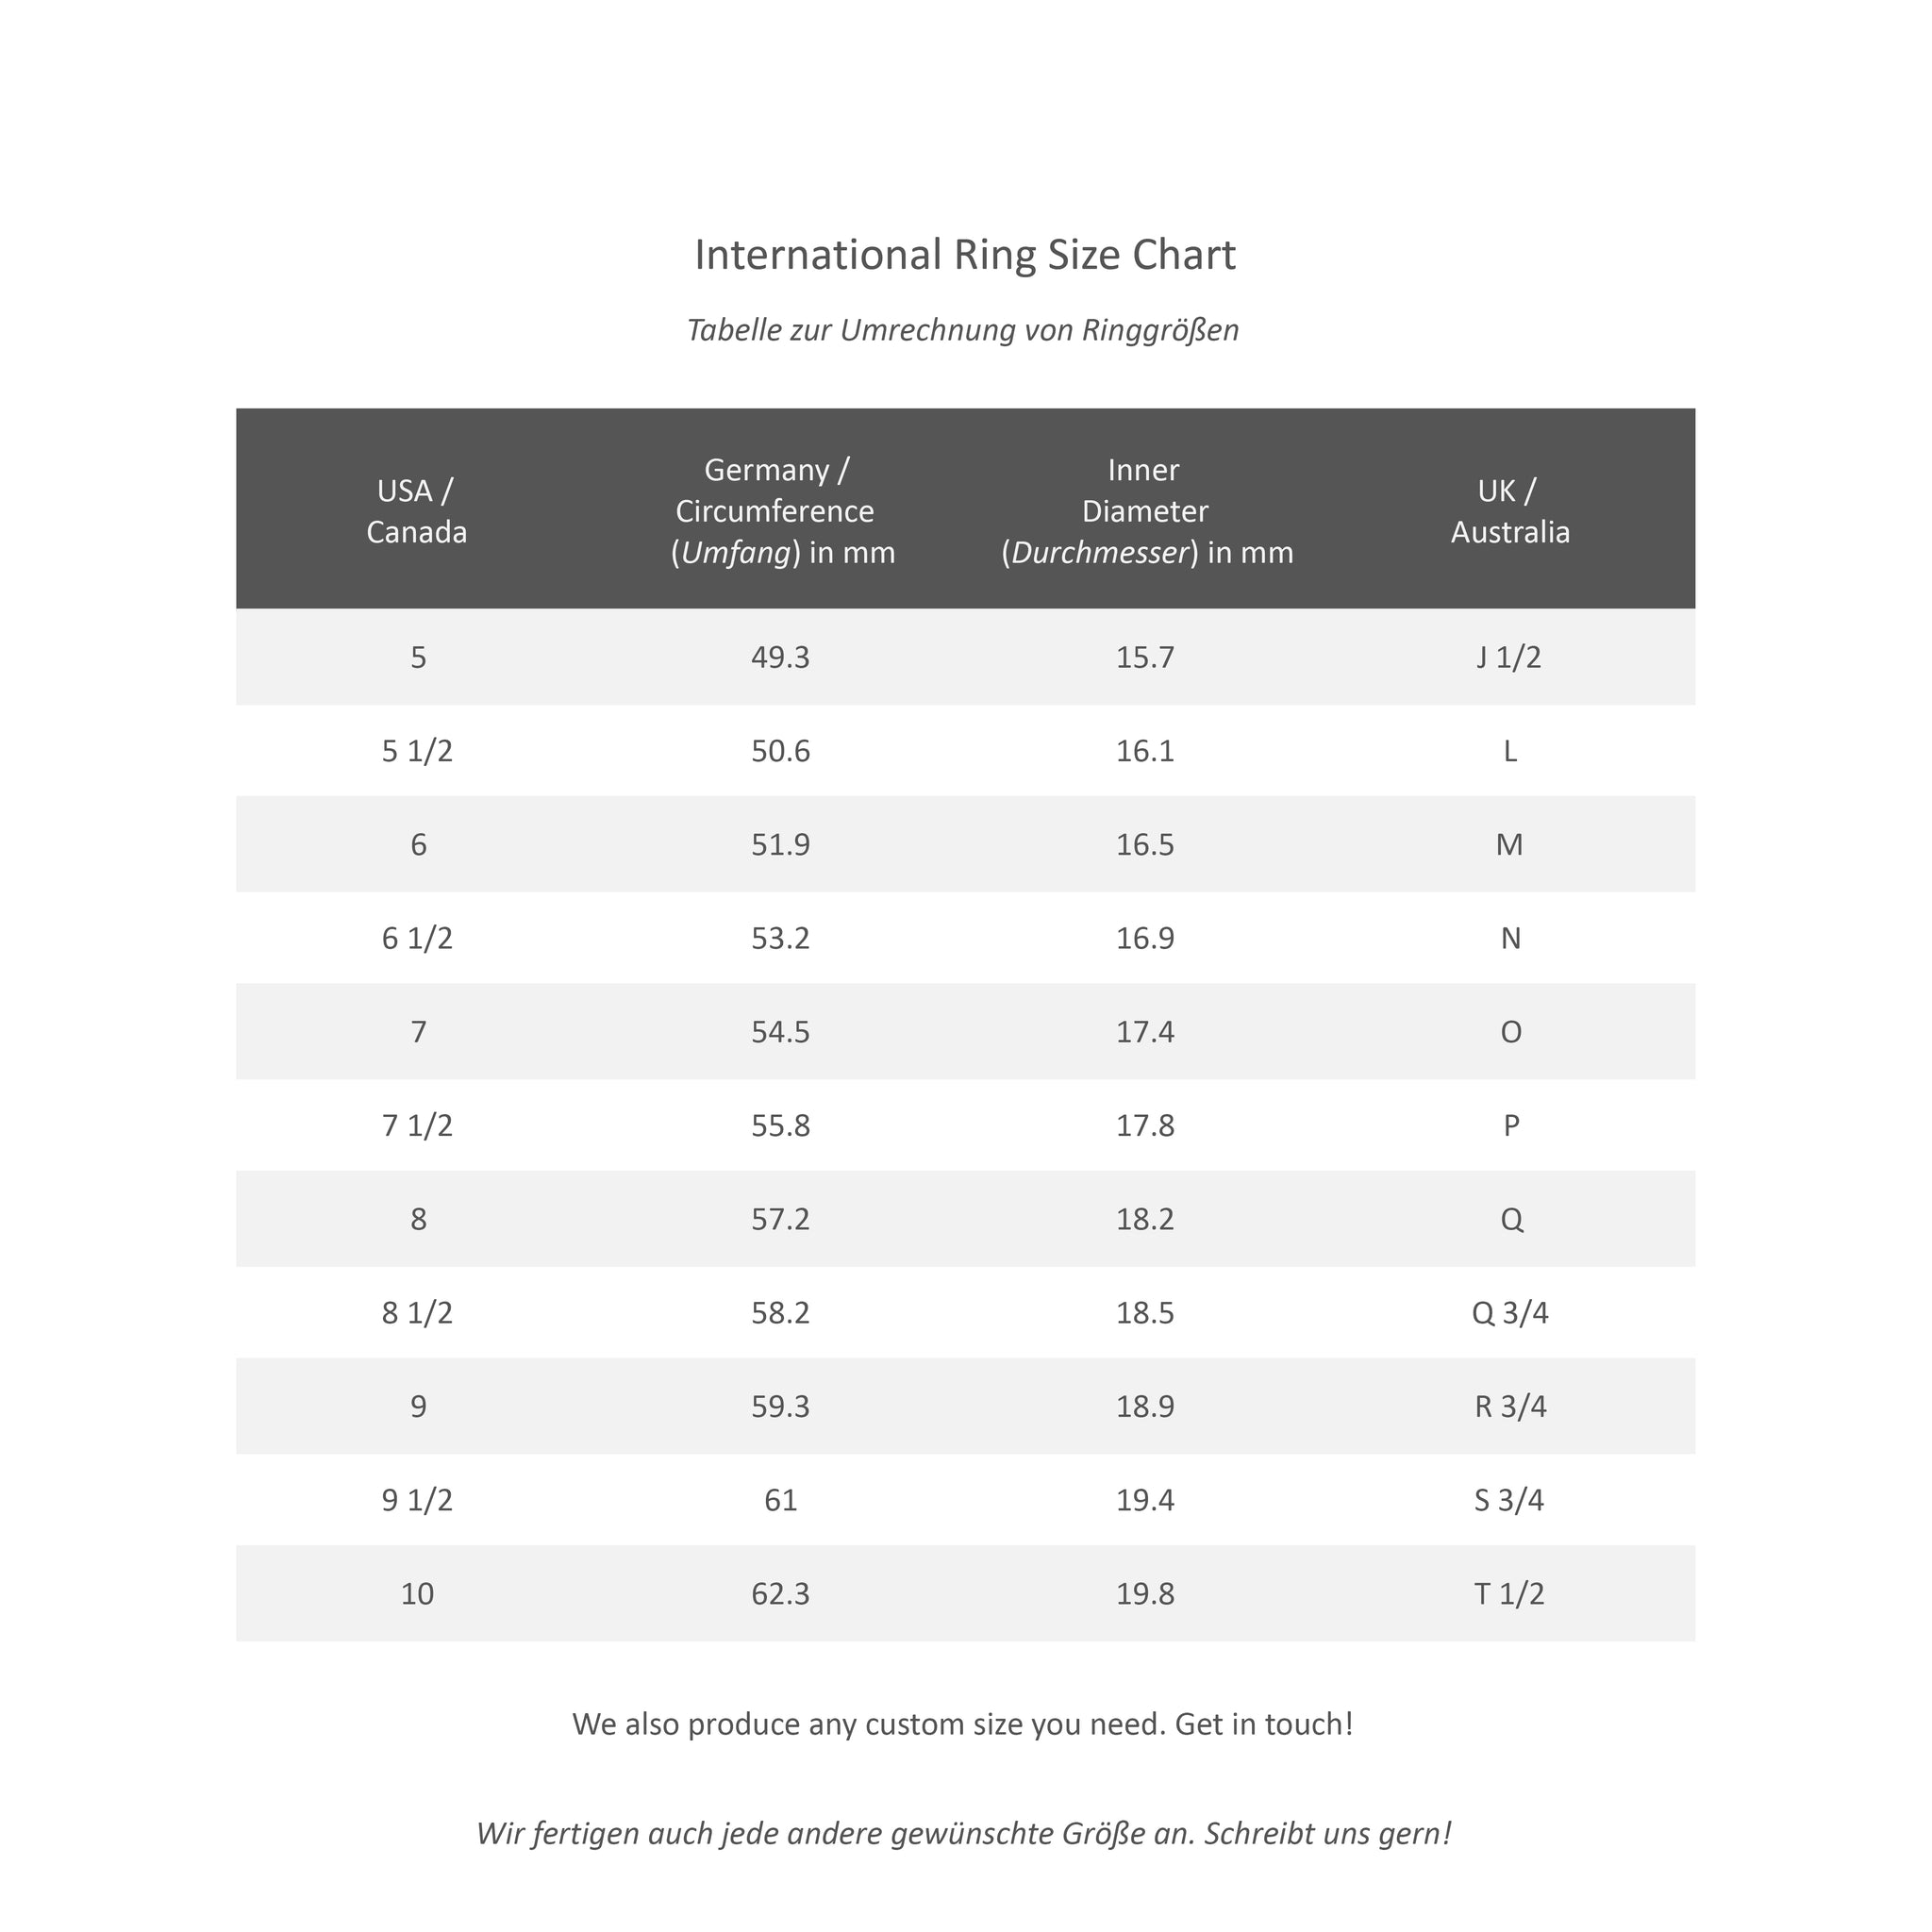 International Ring Size Chart -  Convert your ring size between US, Canadian, German, UK and Australian ring sizes.